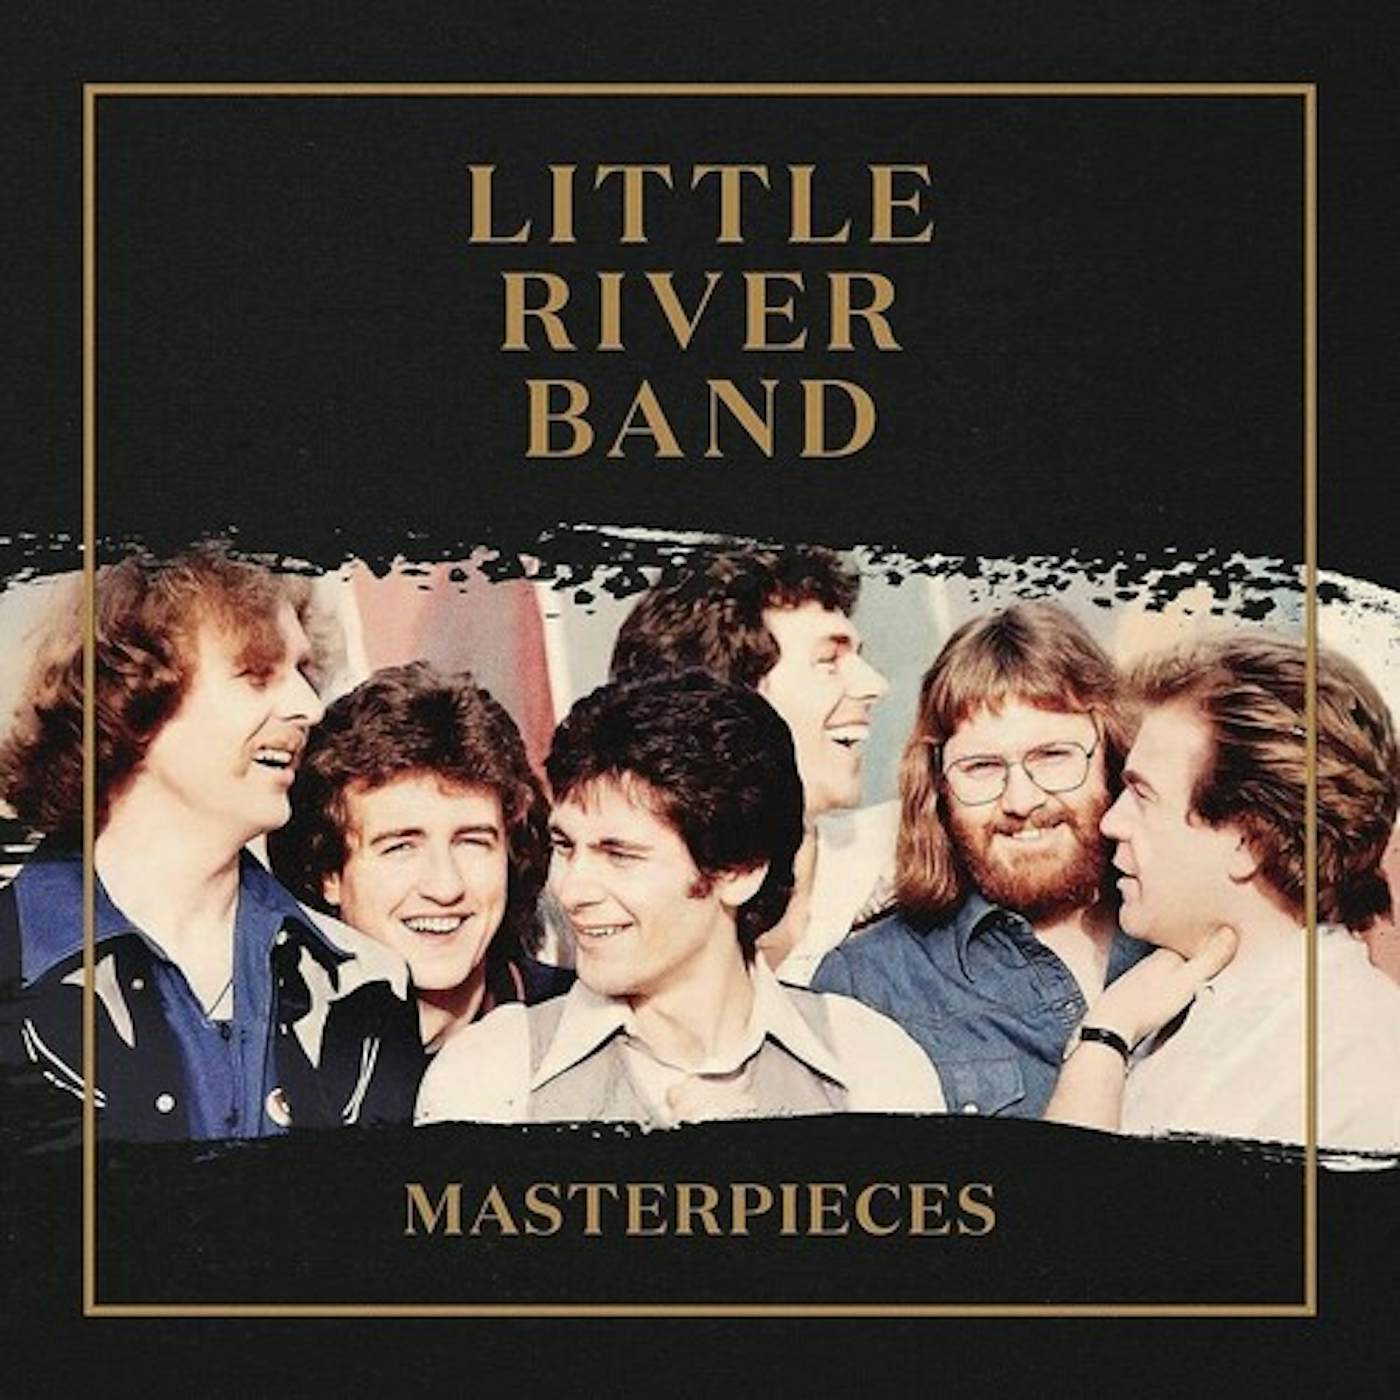 Little River Band Masterpieces Vinyl Record